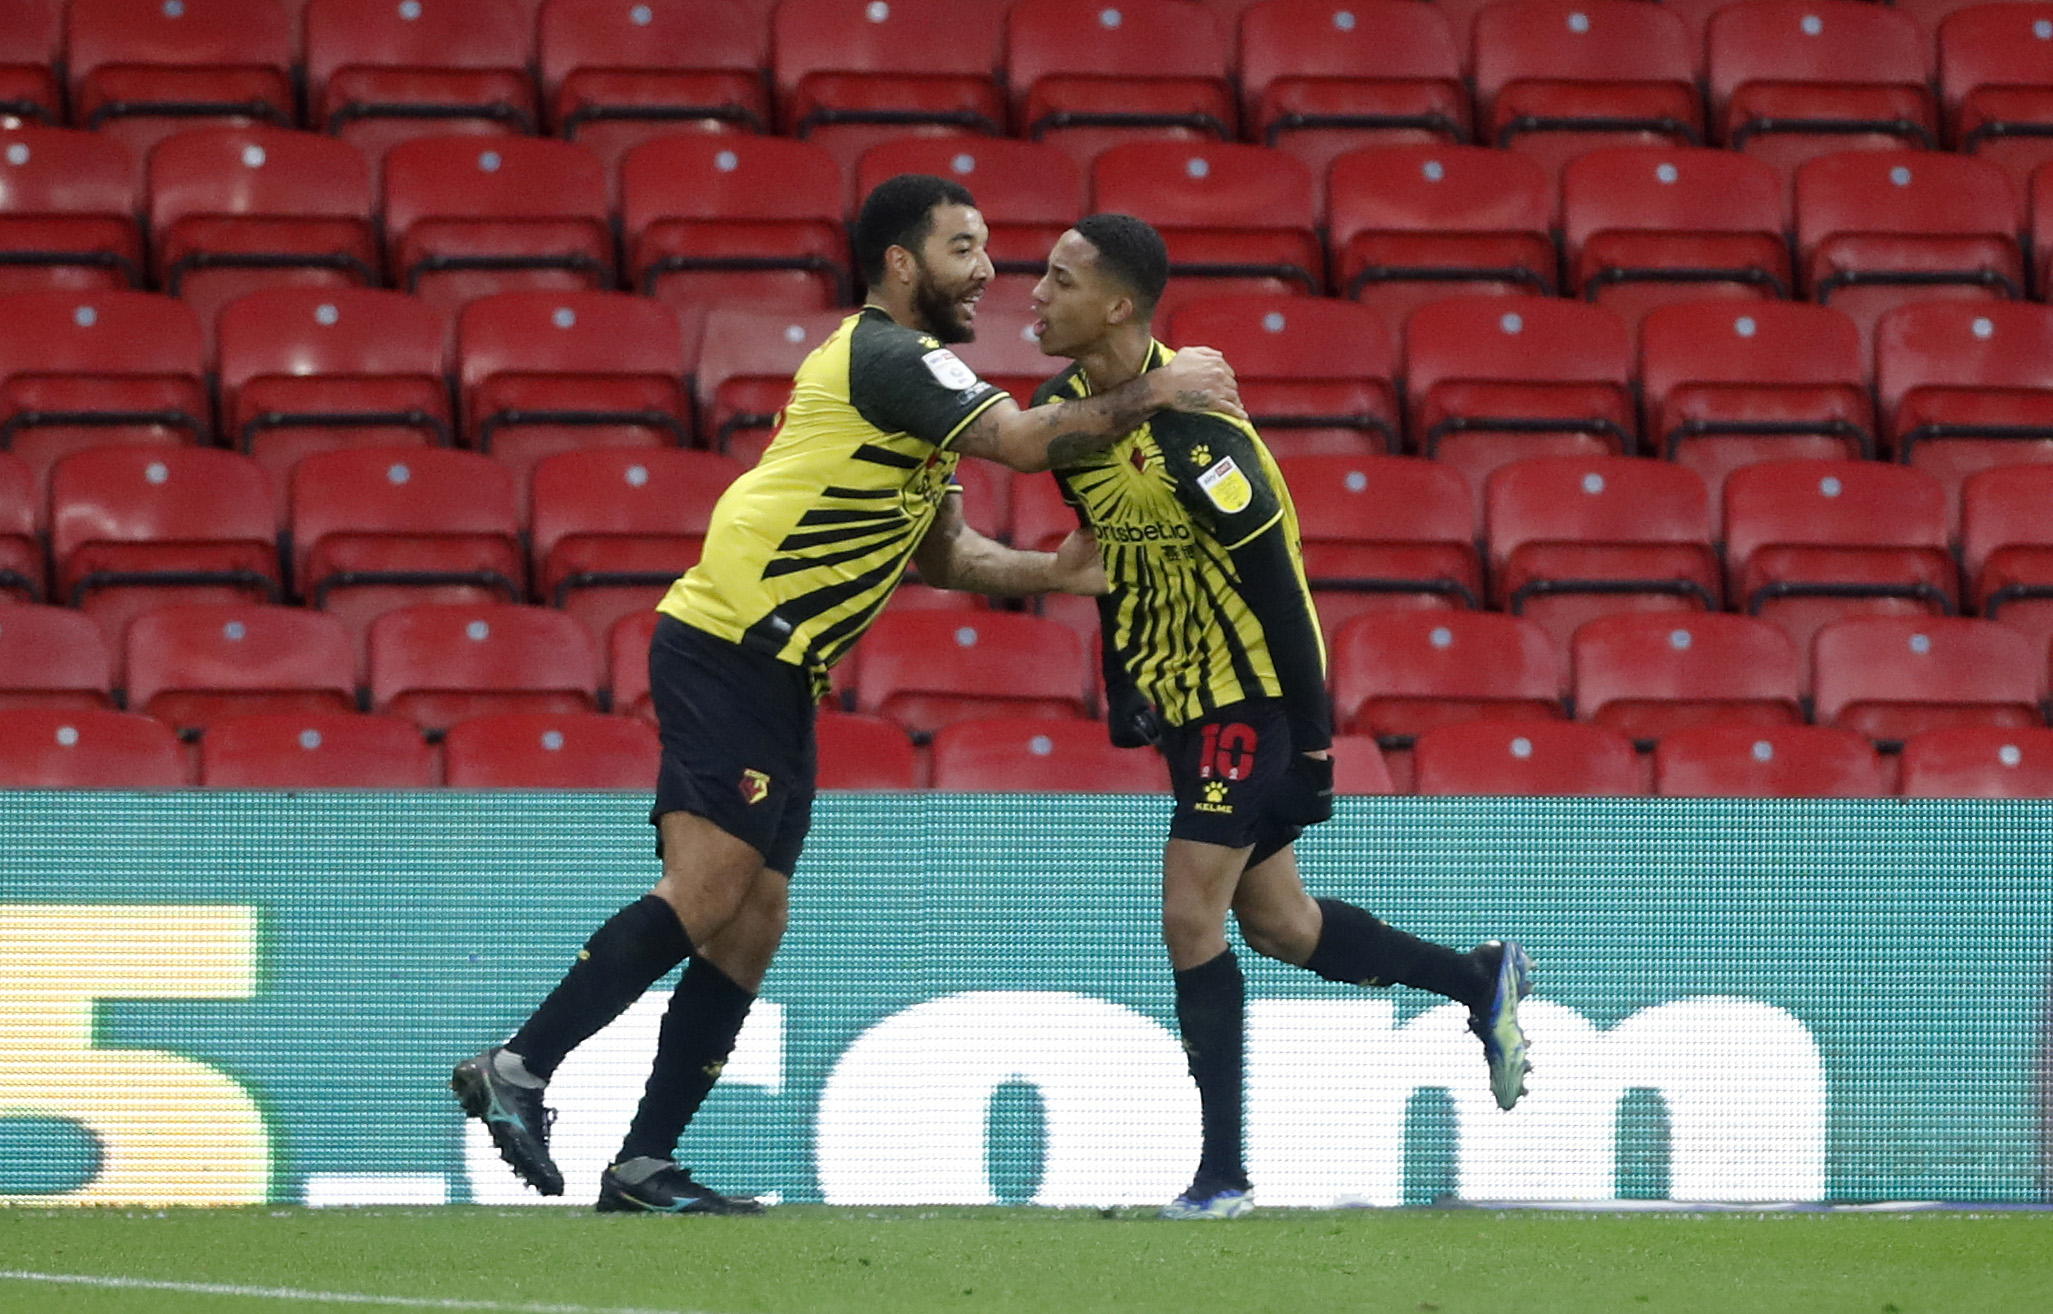 Watford beat Huddersfield Town through Tom Cleverley and Joao Pedro goals